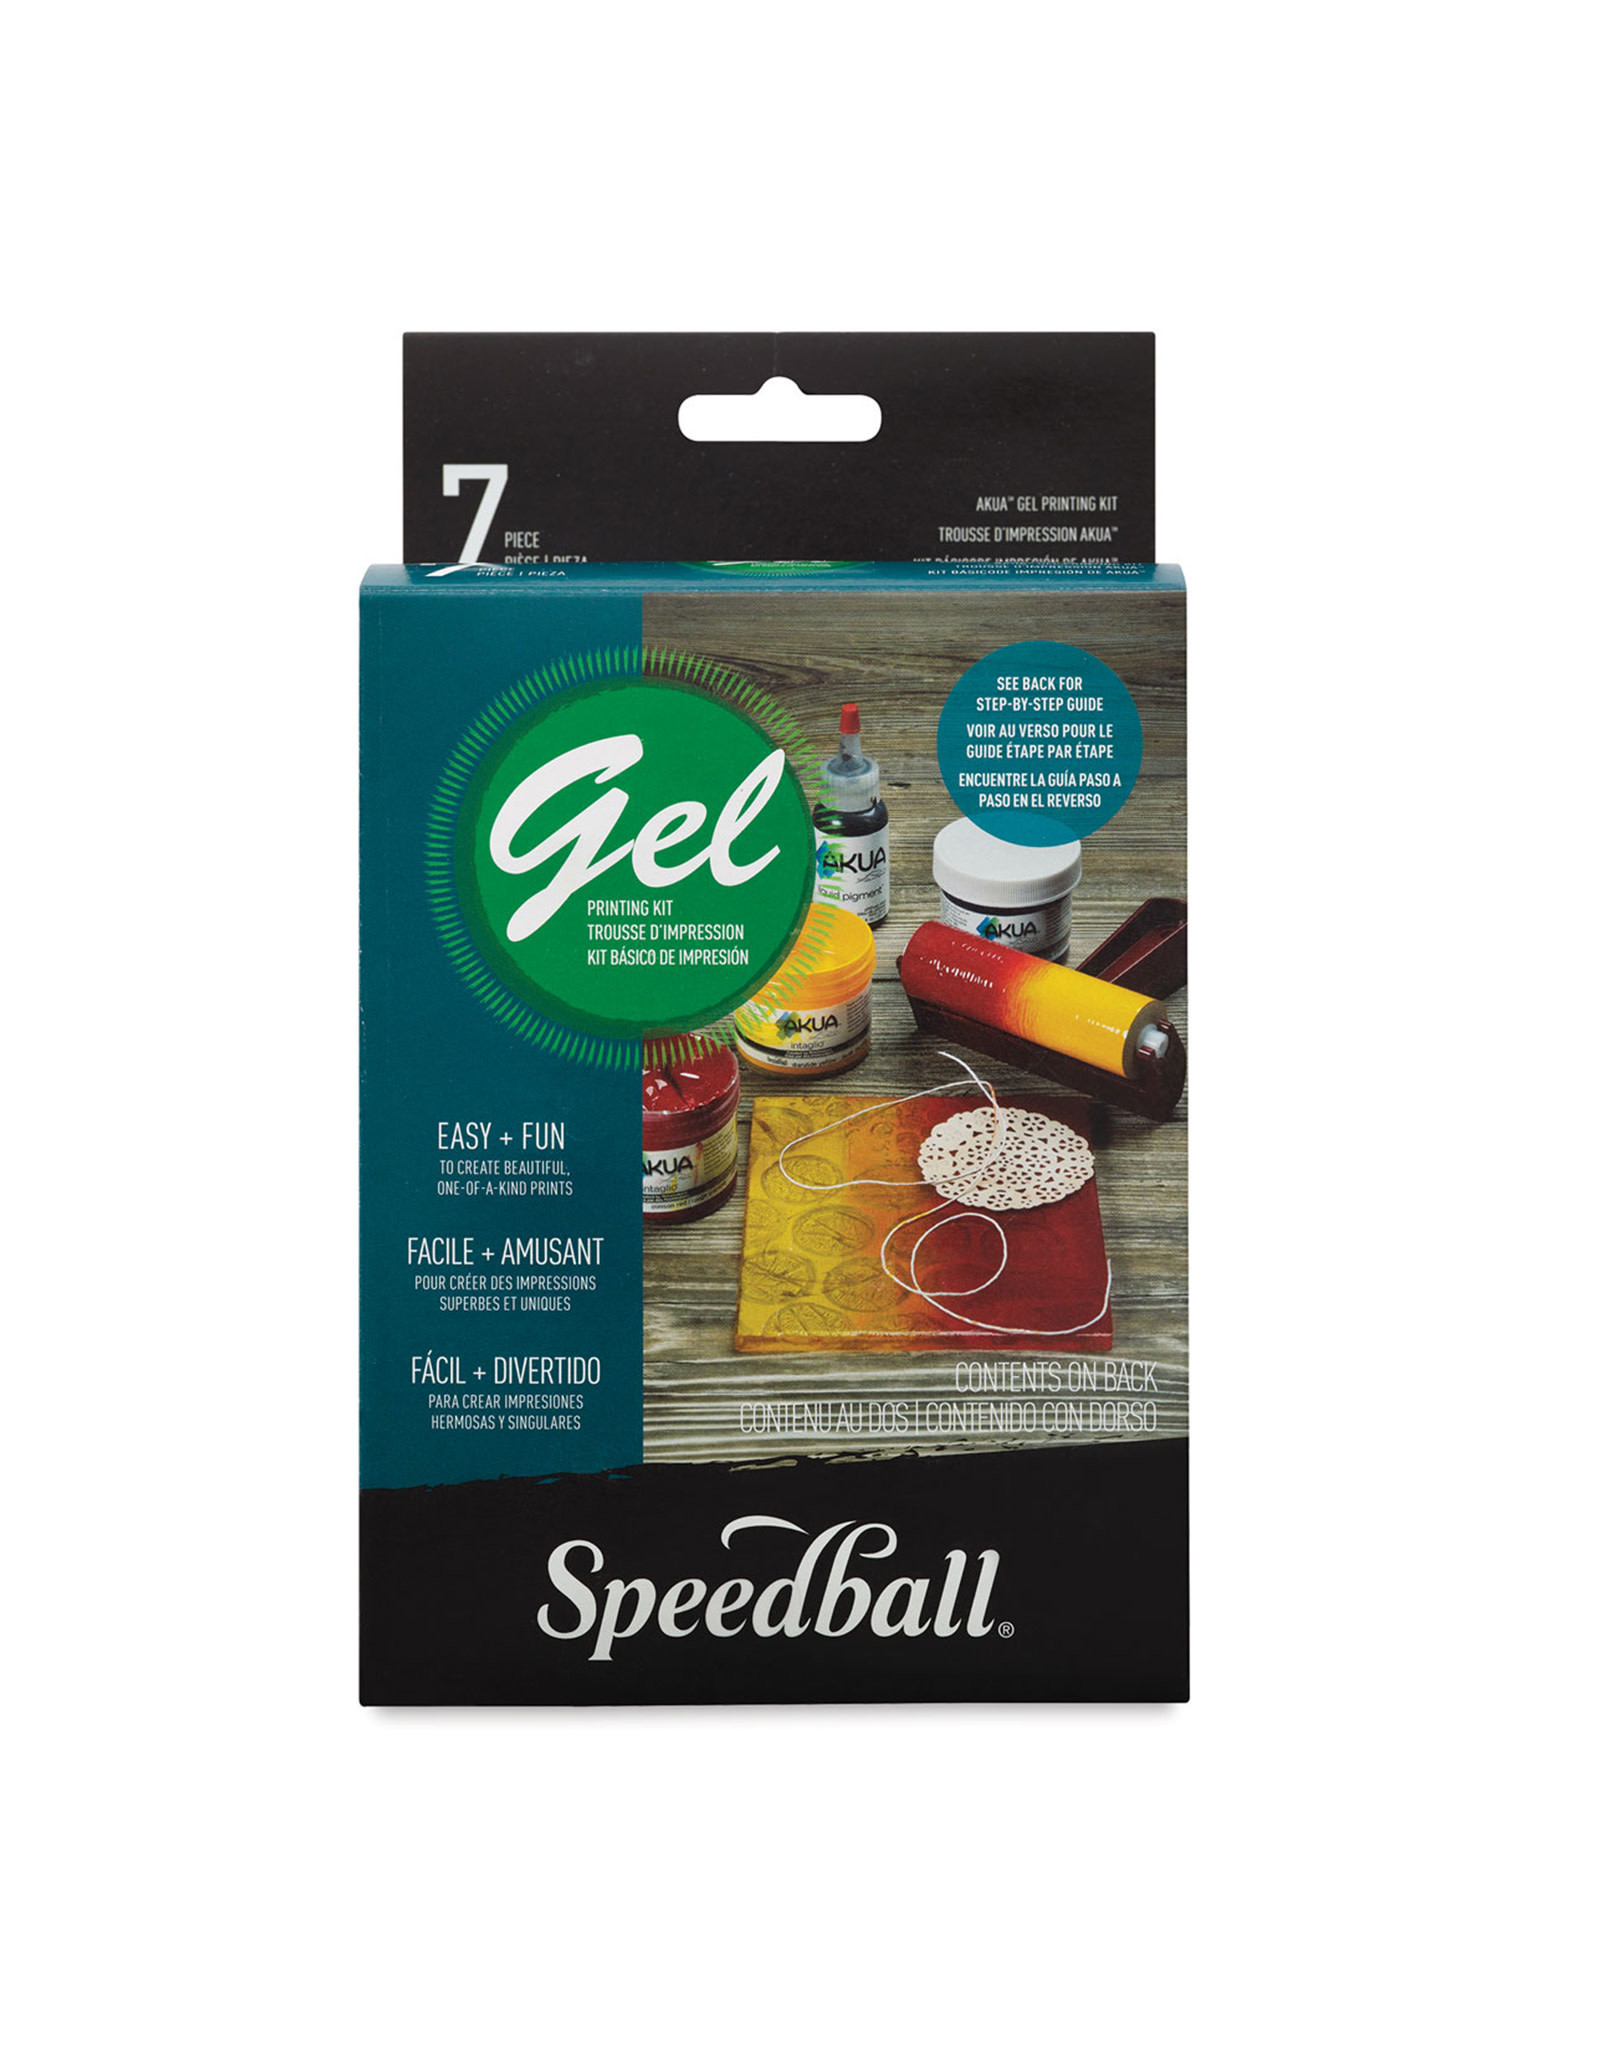 NEW Gel Printing Kit Available NOW!